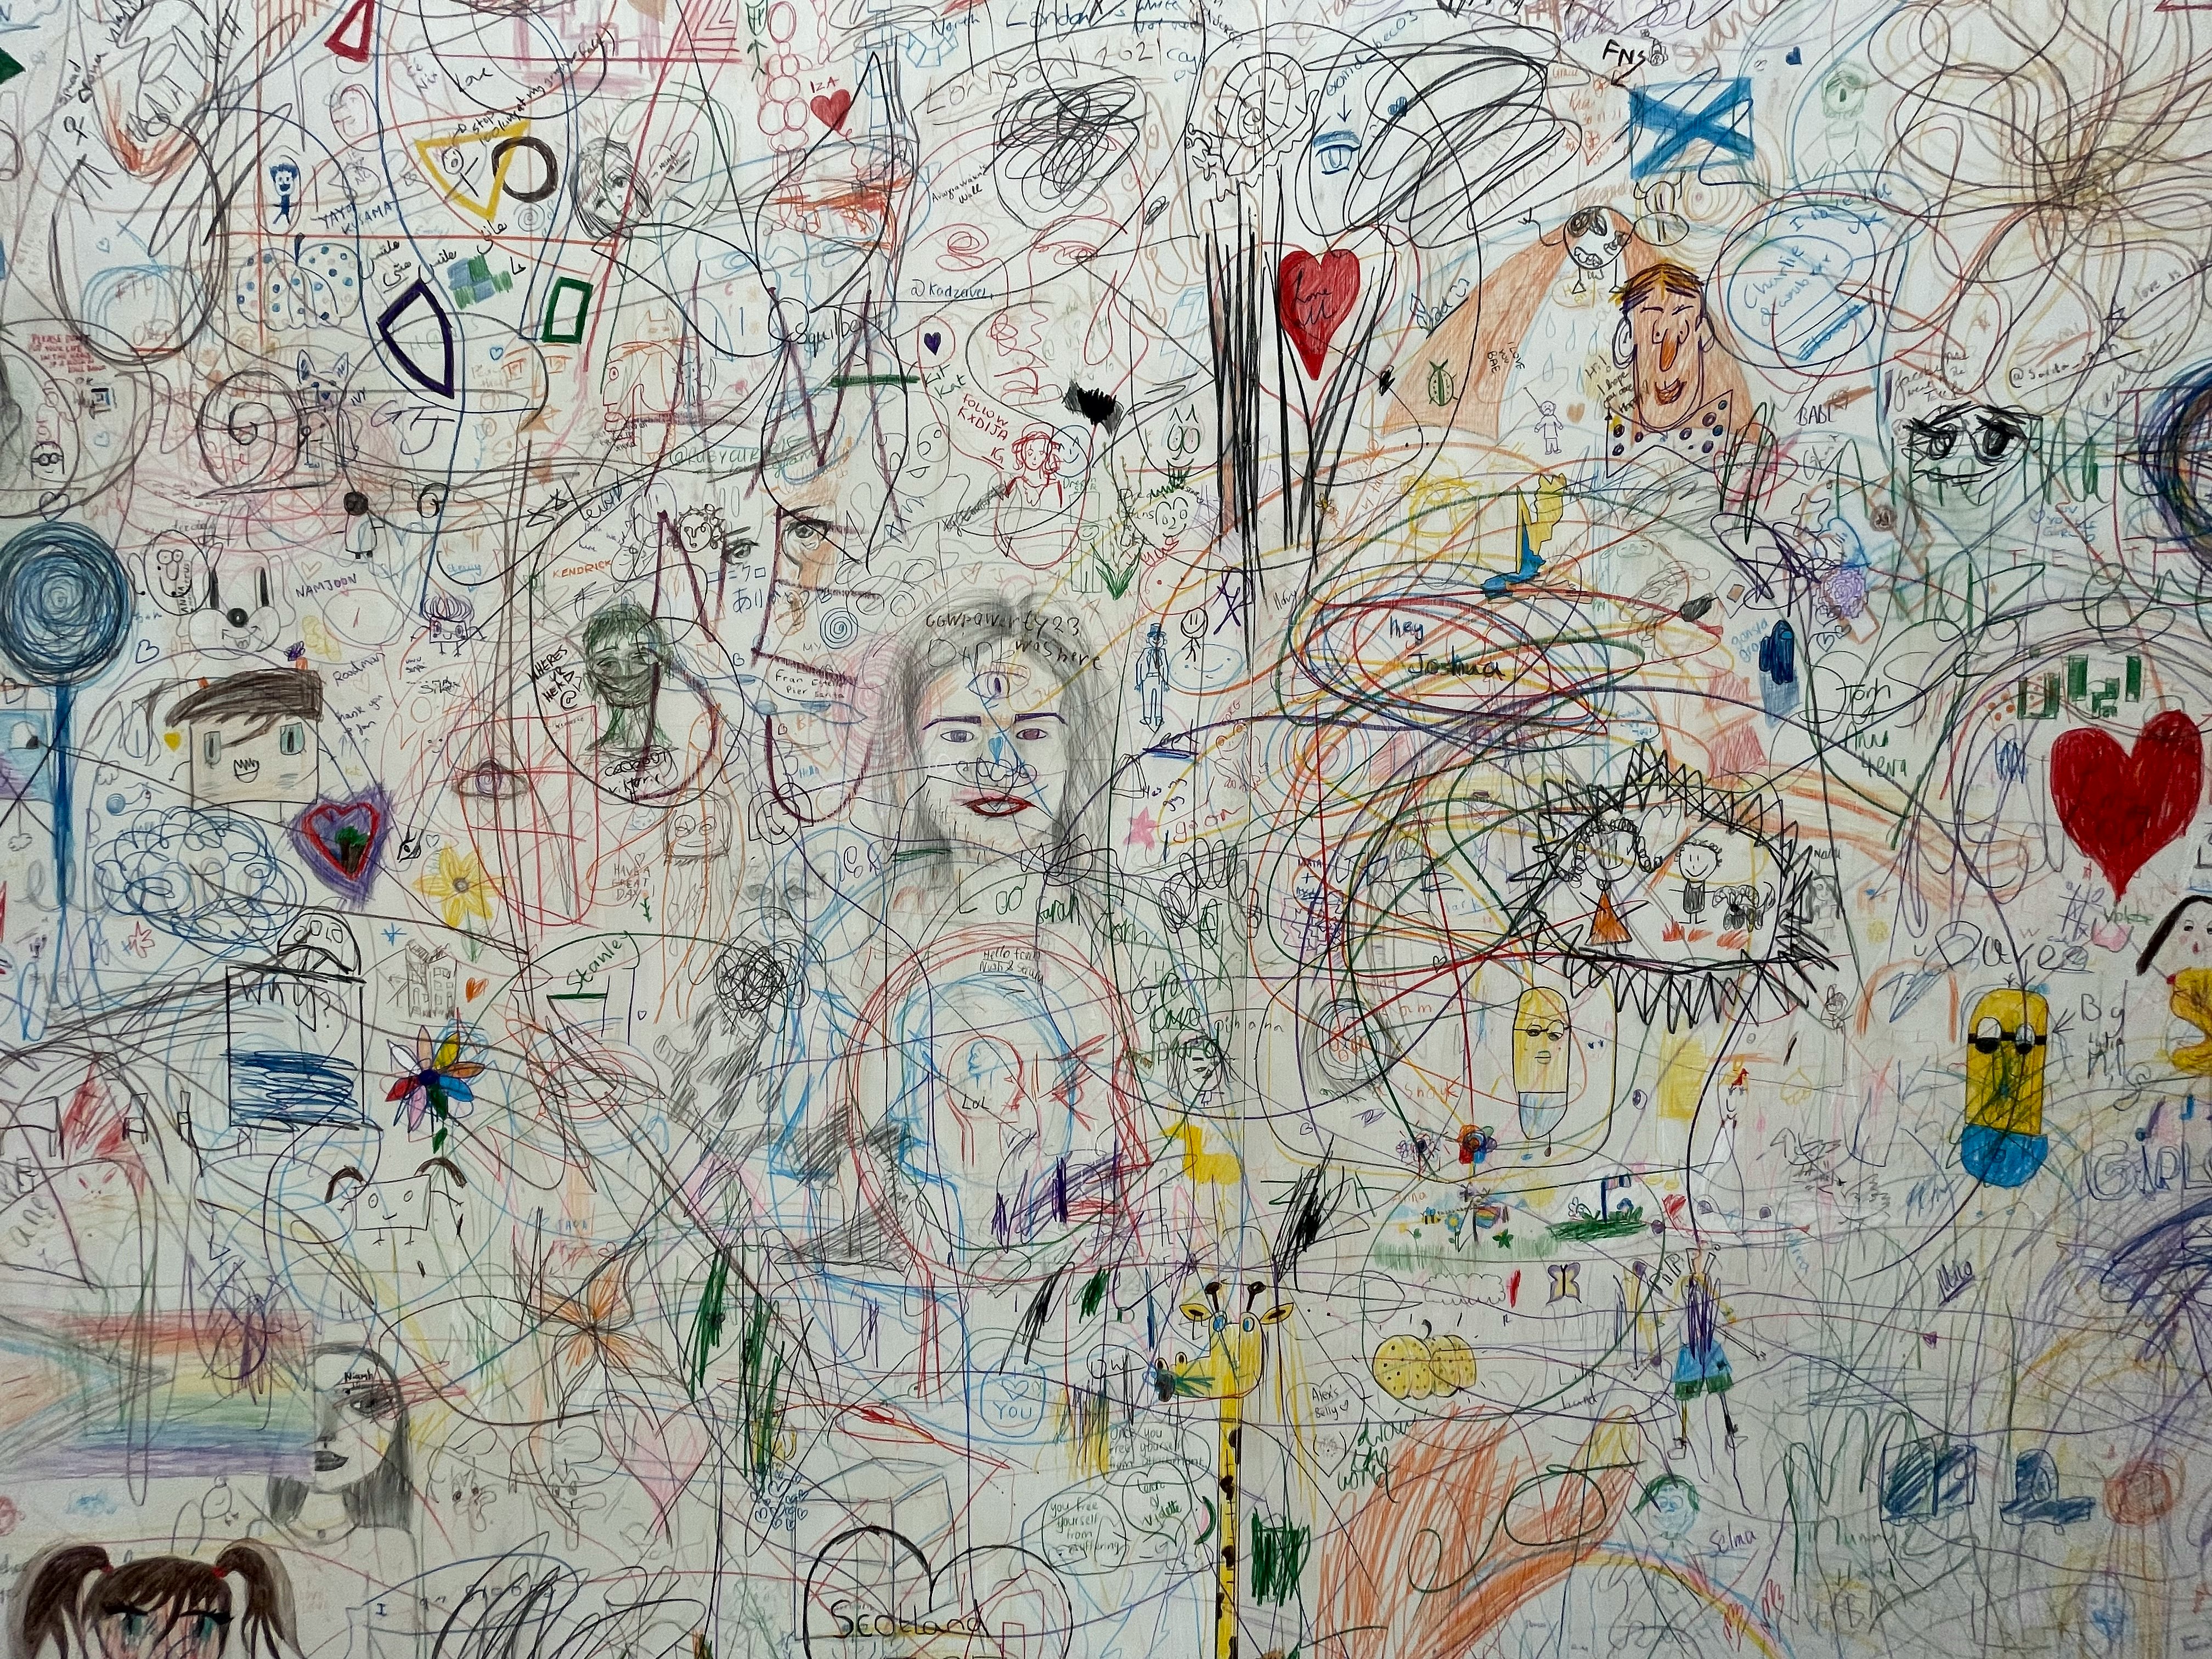 A wall of scribbles at the Tate Modern, London during the Please Draw Freely exhibition, July 2021